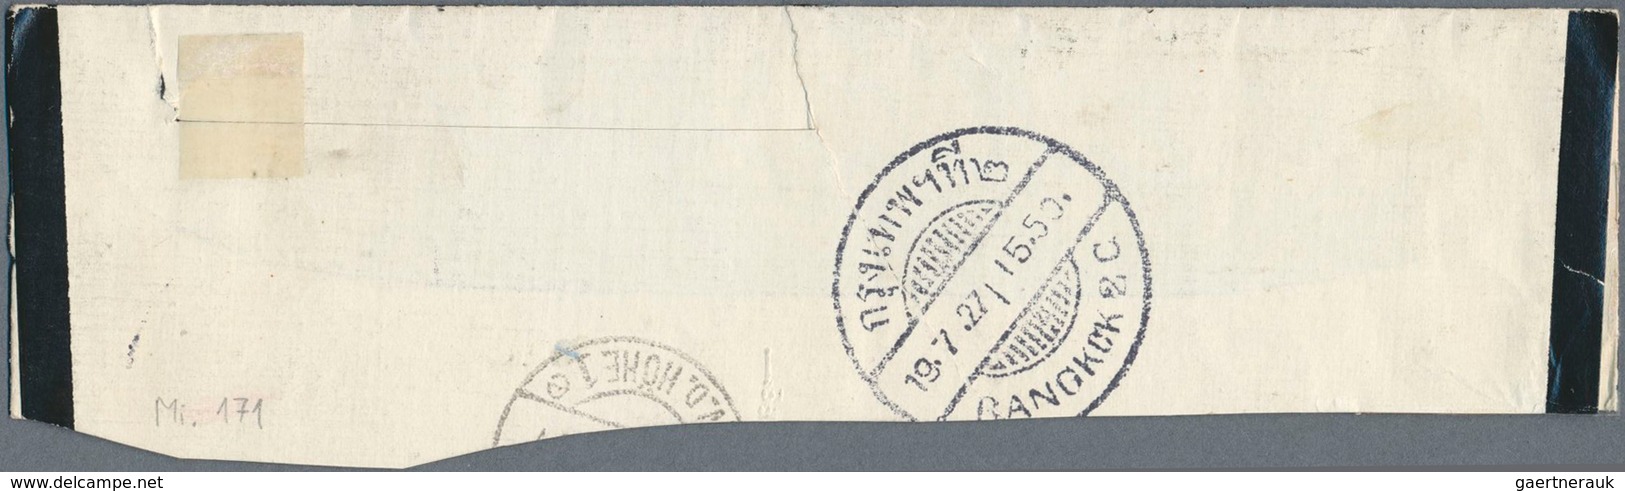 09956 Thailand: 1925-27 Two 'On Post & Telegraph Service' Official Mourning Envelopes From Bangkok To Bern - Thaïlande